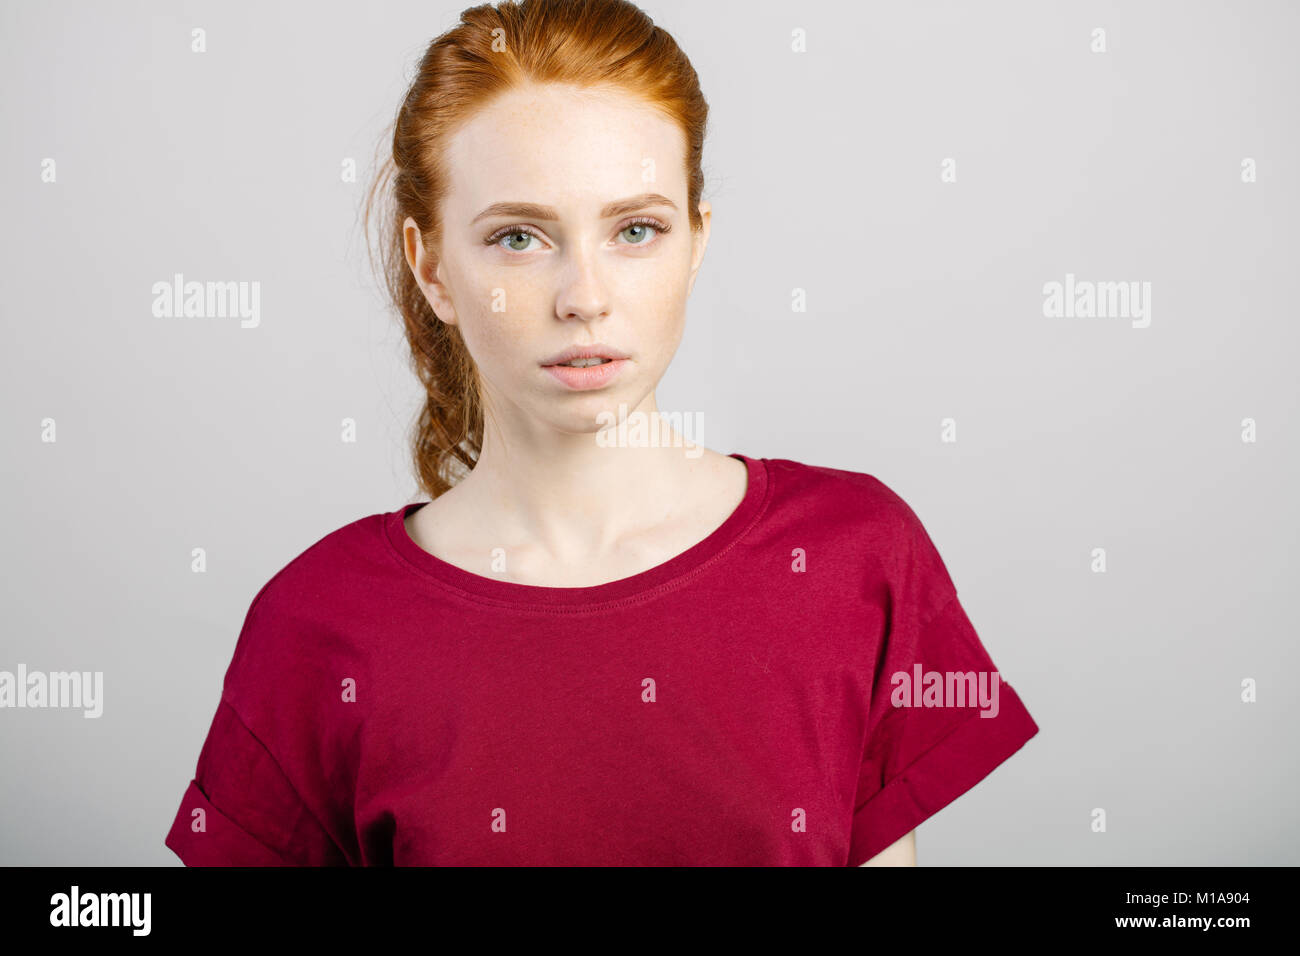 beautiful young redhead girl with clean fresh face and neutral emotions close up Stock Photo